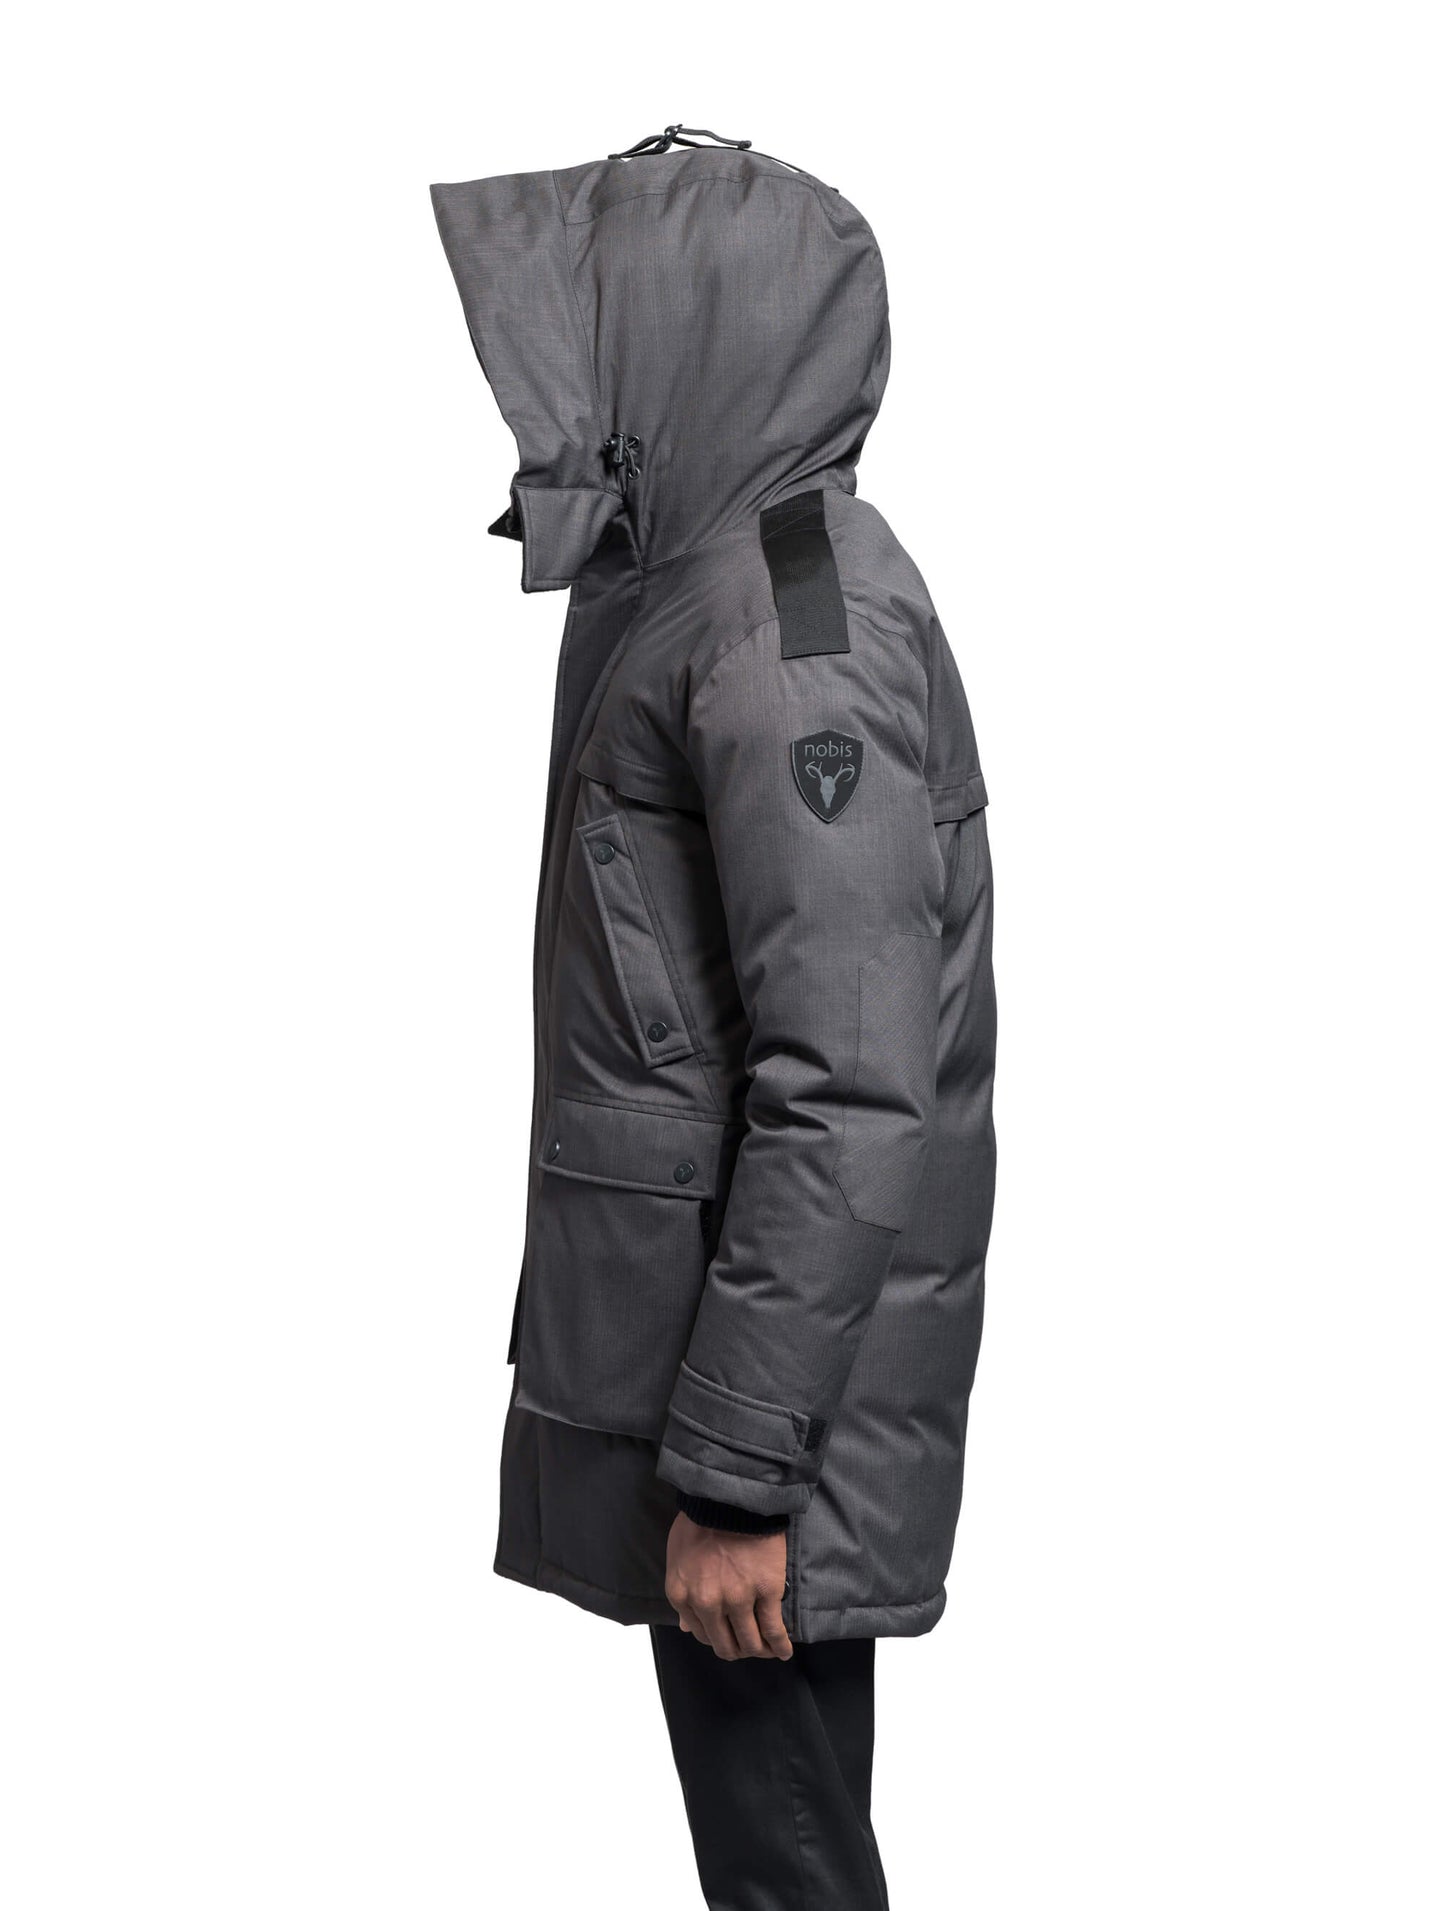 Men's Best Selling Parka the Yatesy is a down filled jacket with a zipper closure and magnetic placket in Steel Grey